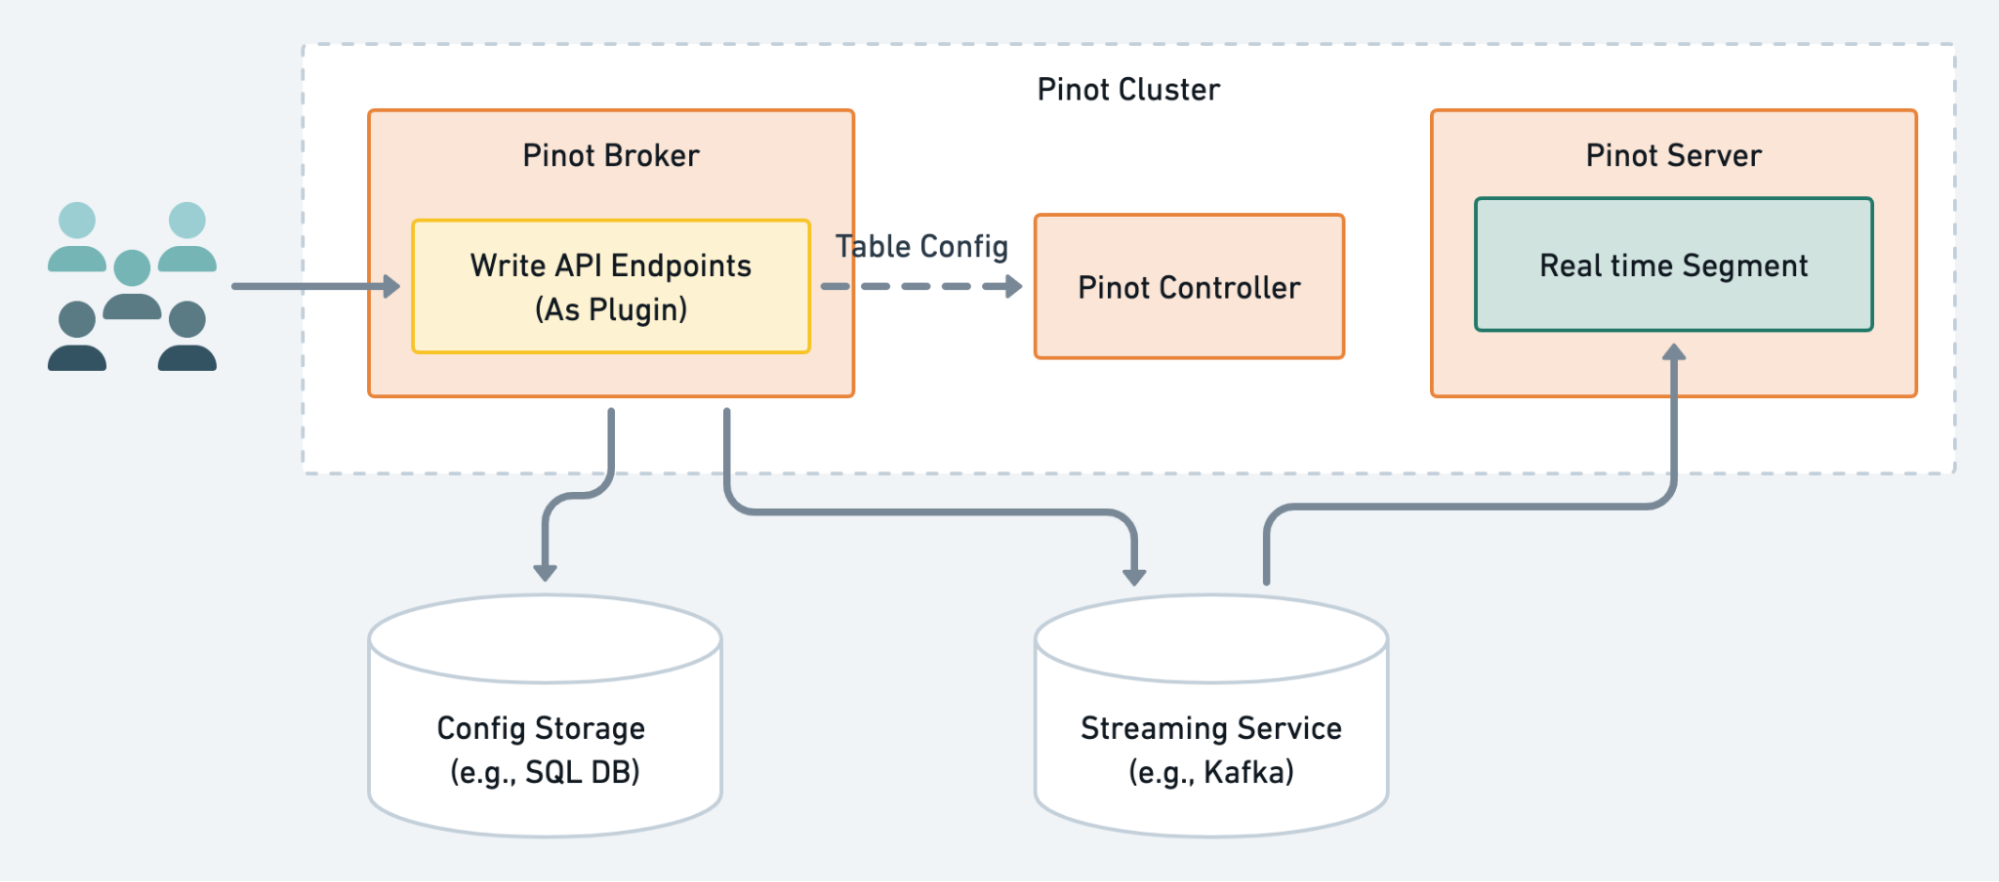 Relationship between components of WriteAPI and Apache Pinot